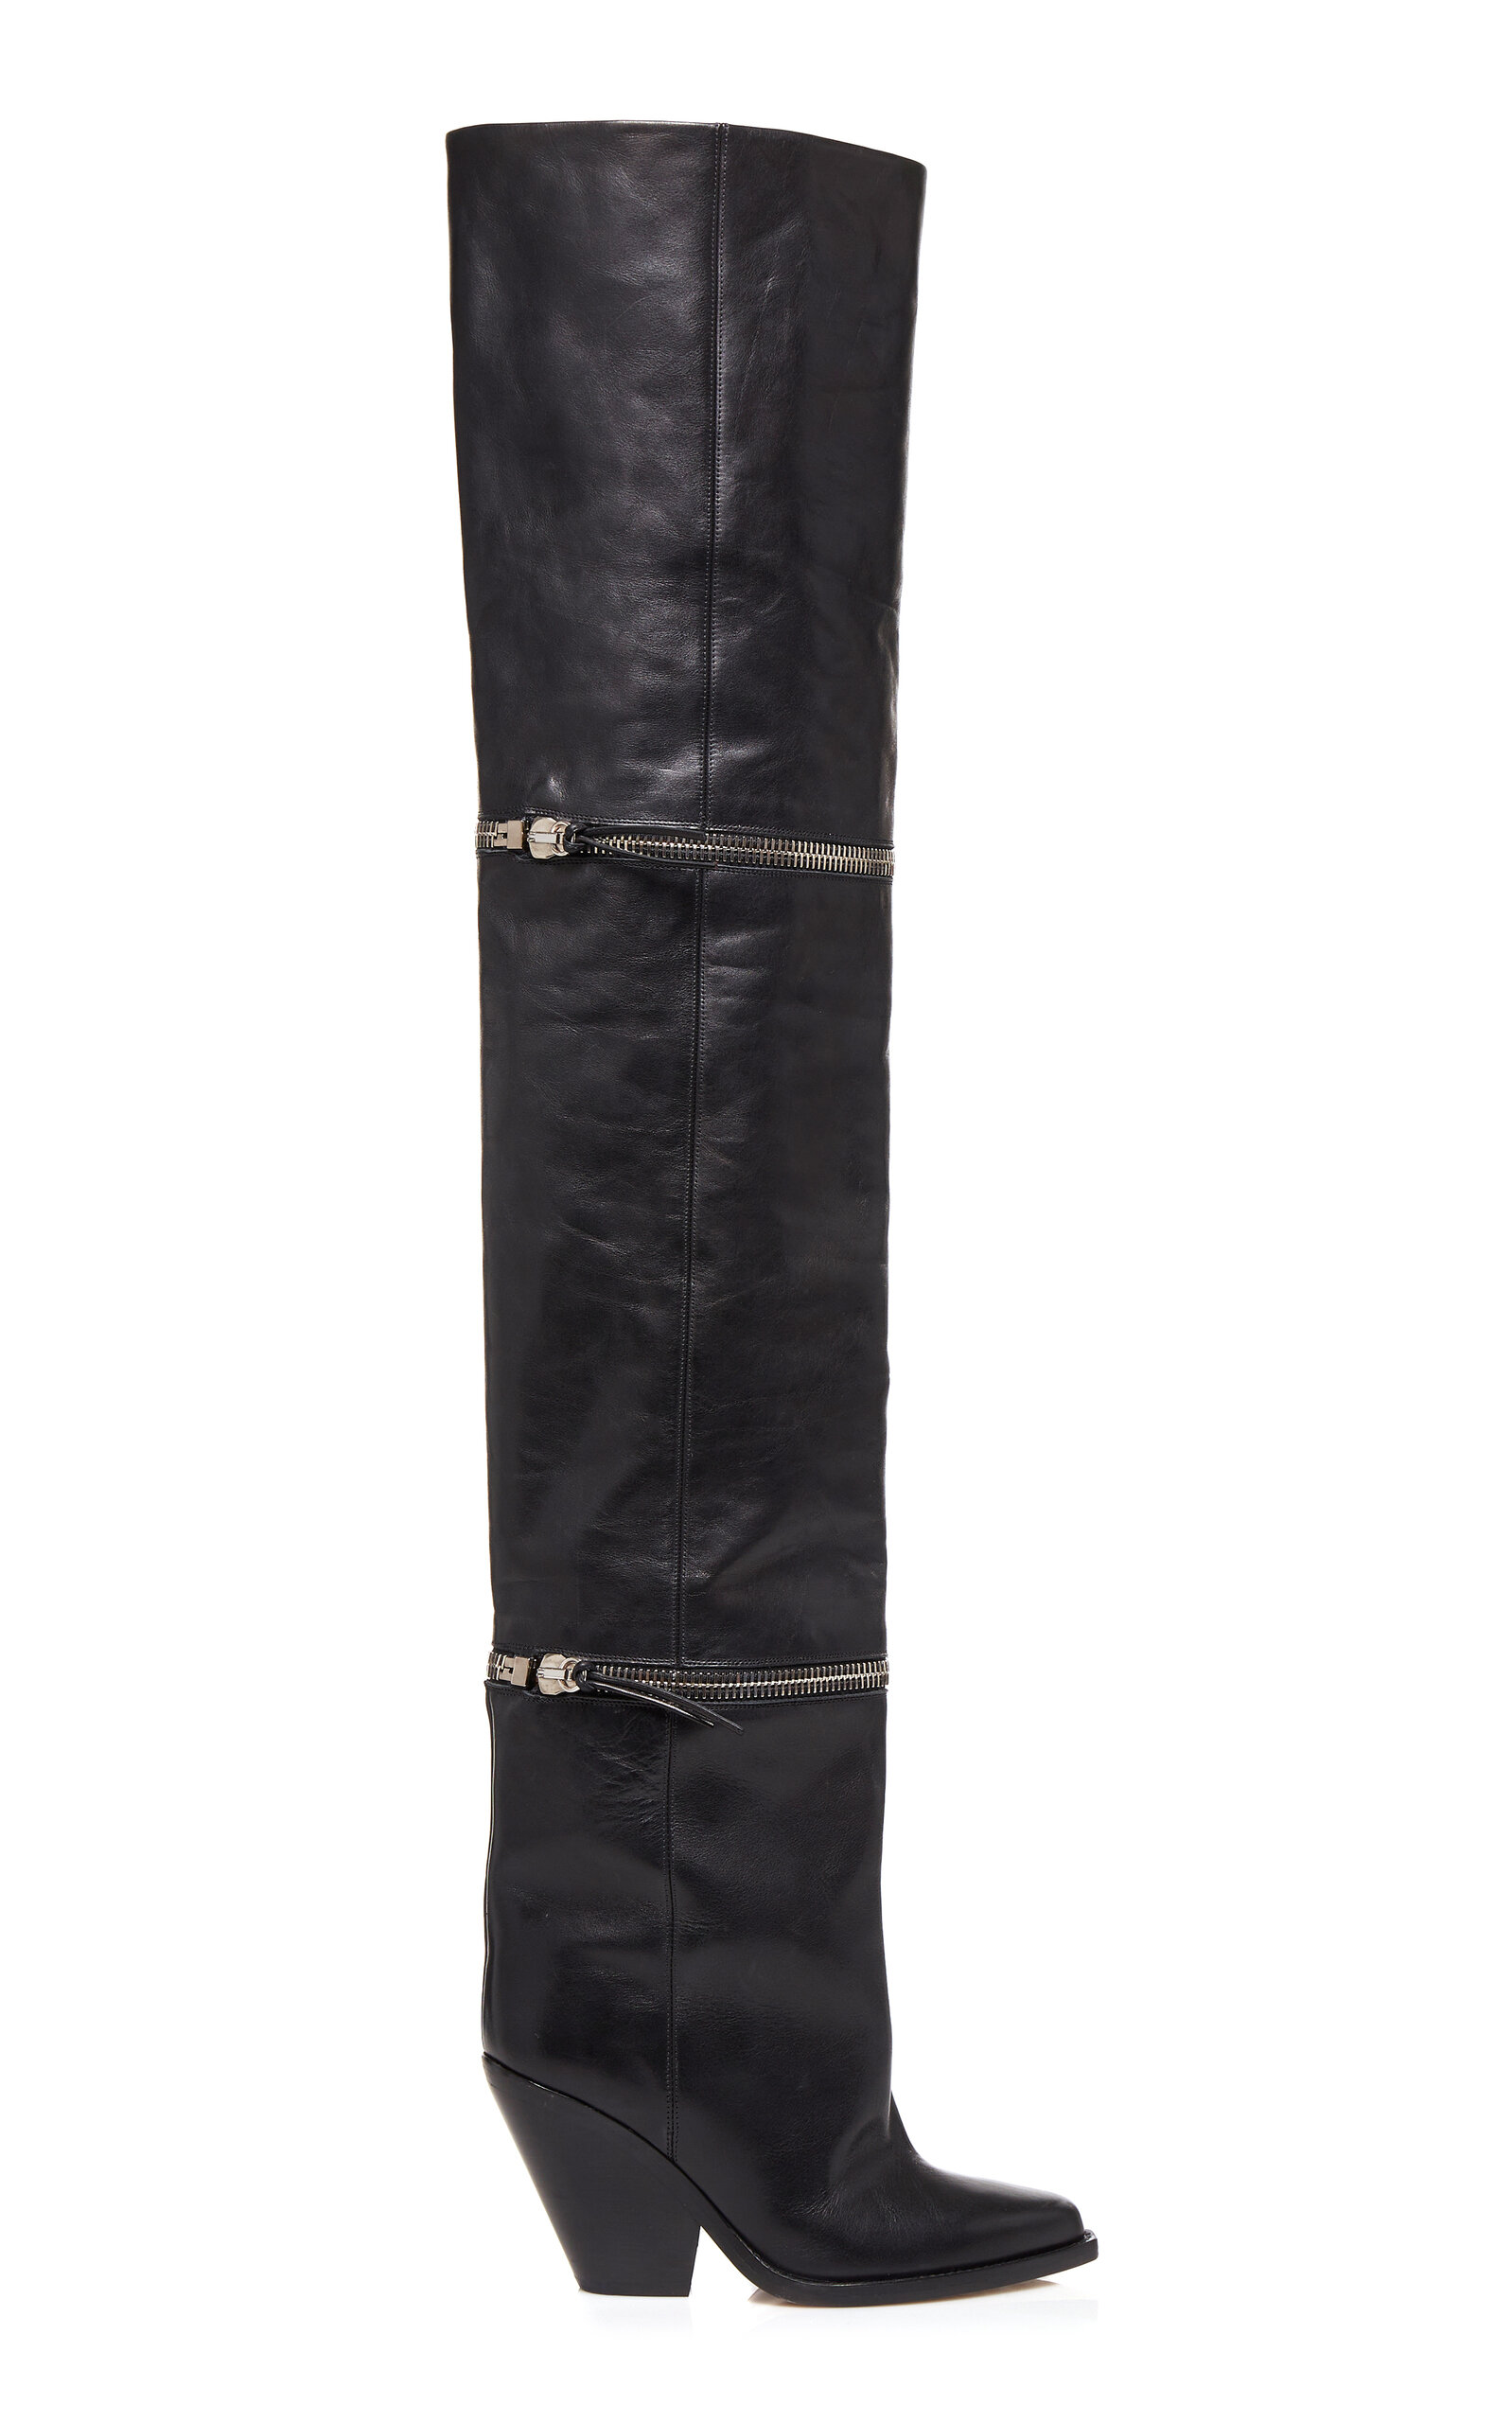 Lelodie convertible leather isabel marant over the knee boots black